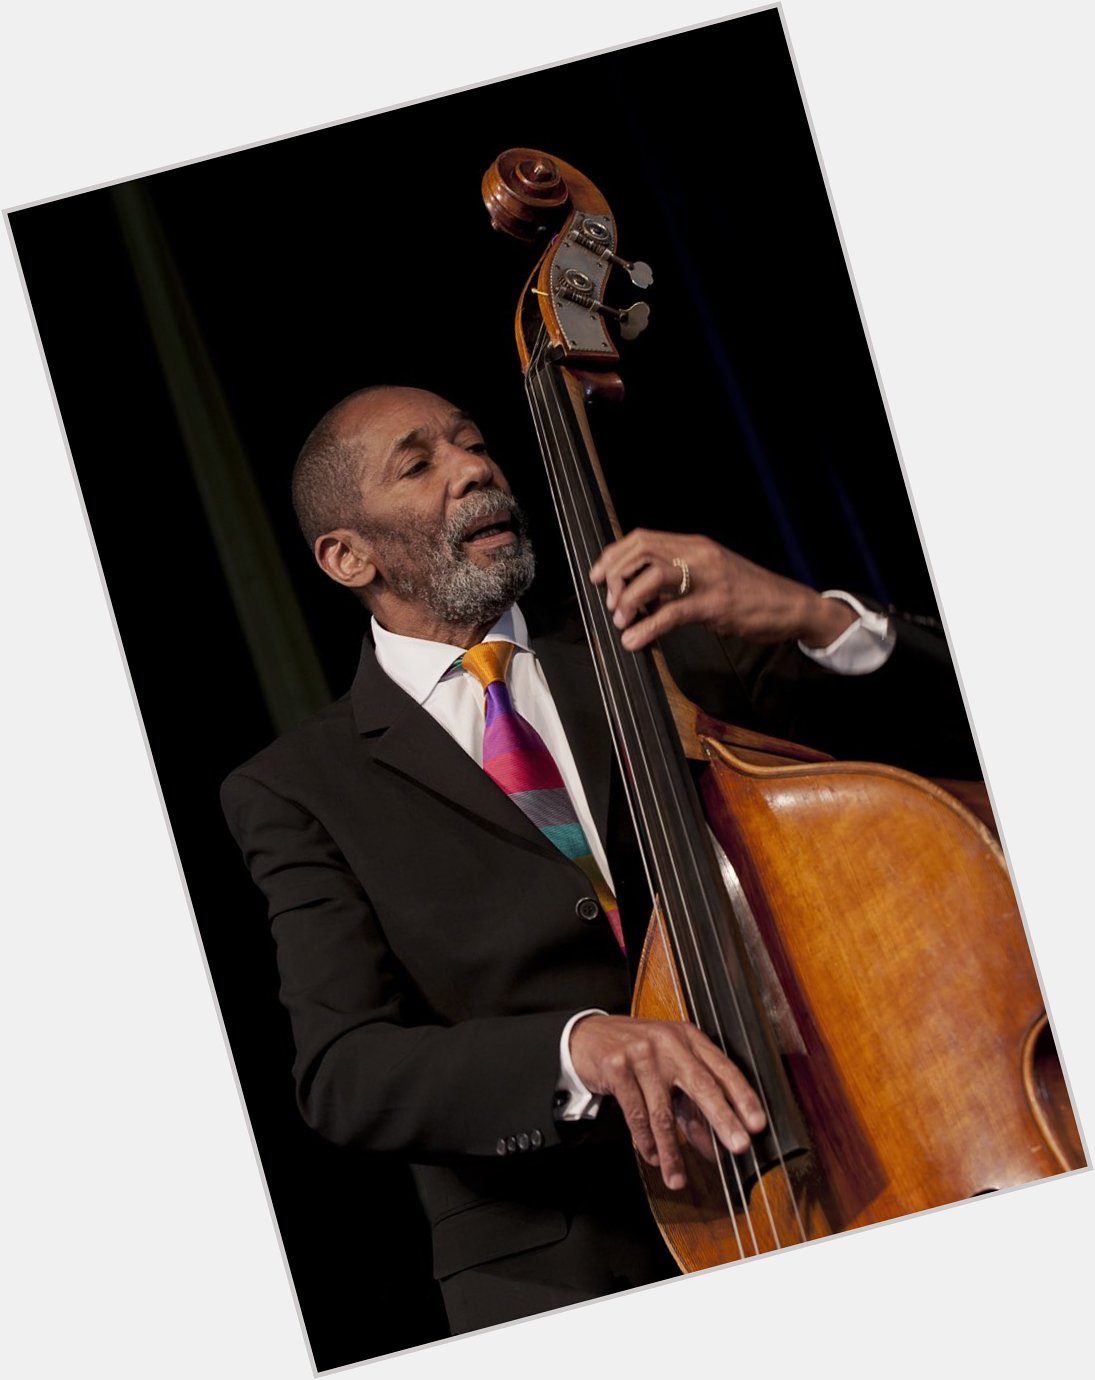 A very happy 80th birthday to a king, Mr. Ron Carter. He\s a musical hero to so many of us. Enjoy your day, sir! 